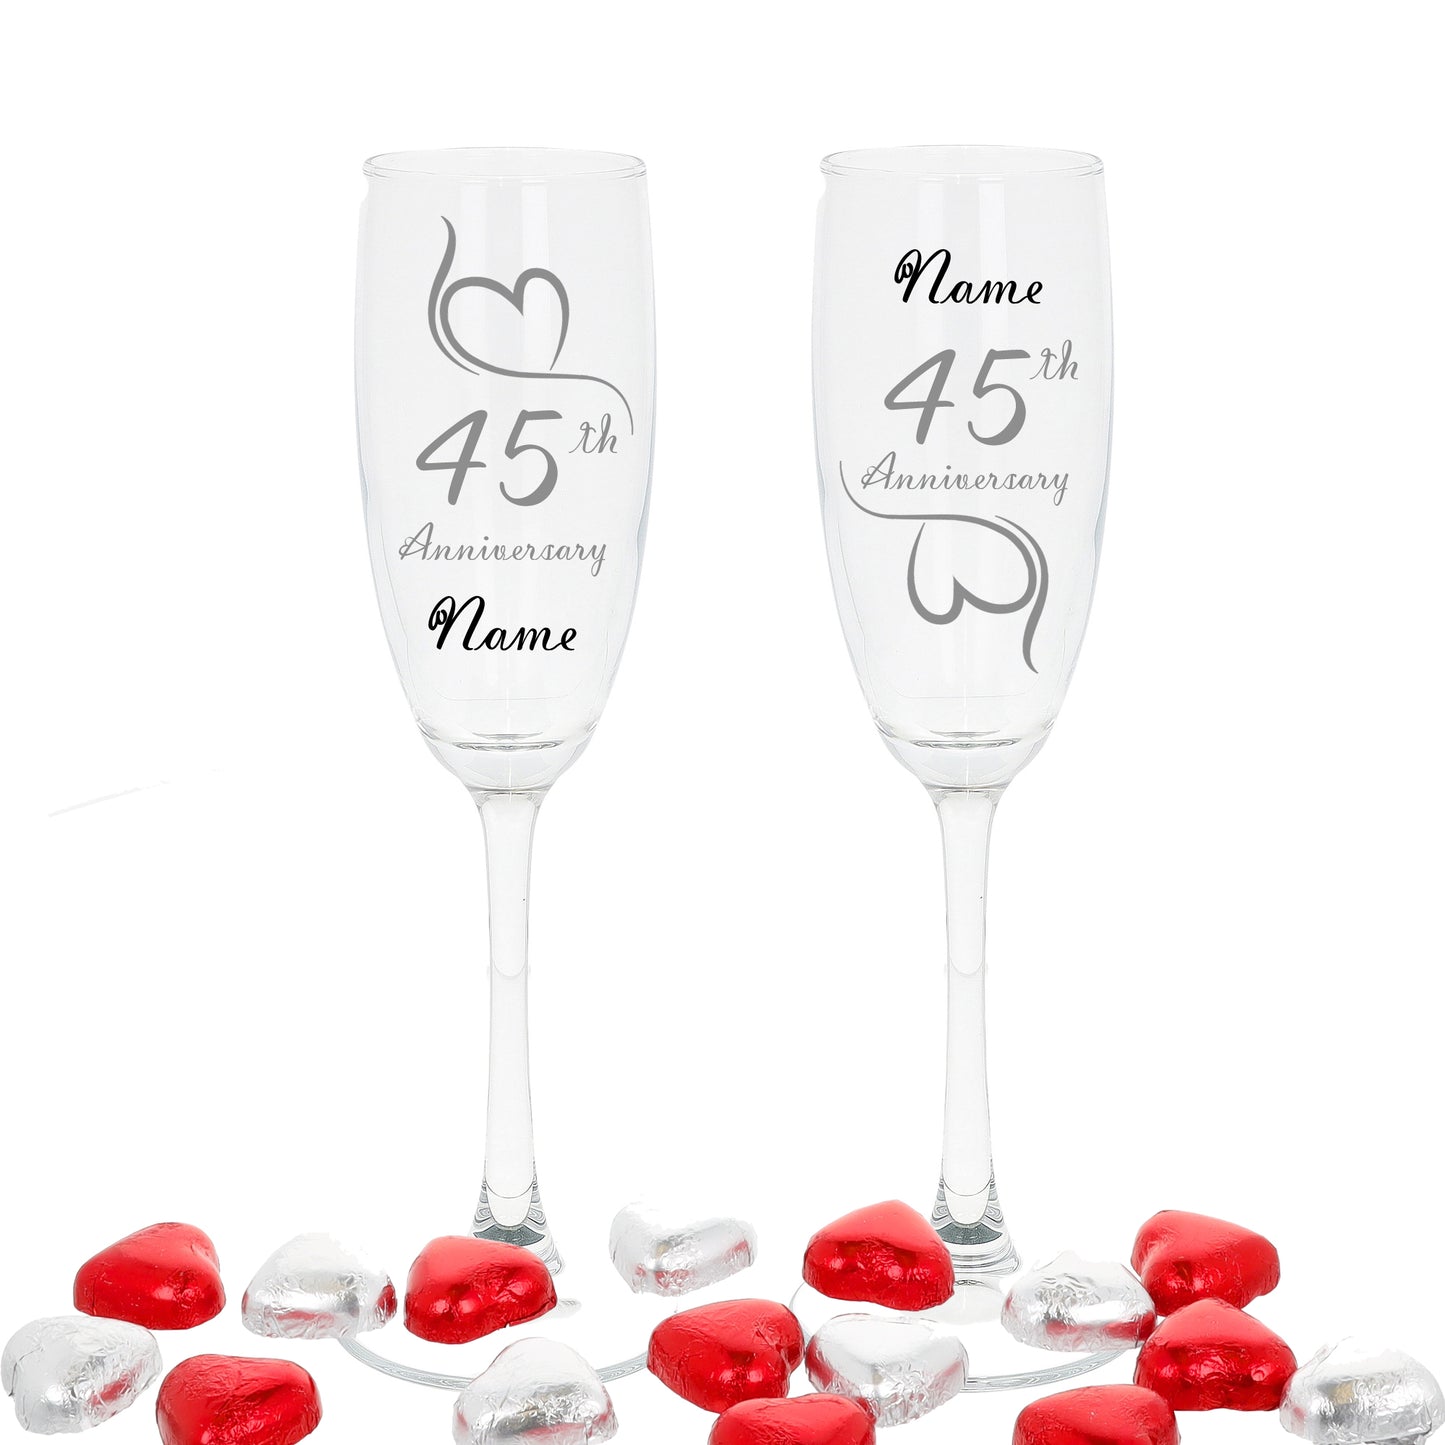 Engraved 45th Sapphire Wedding Anniversary Personalised Engraved Champagne Glass Gift Set  - Always Looking Good -   